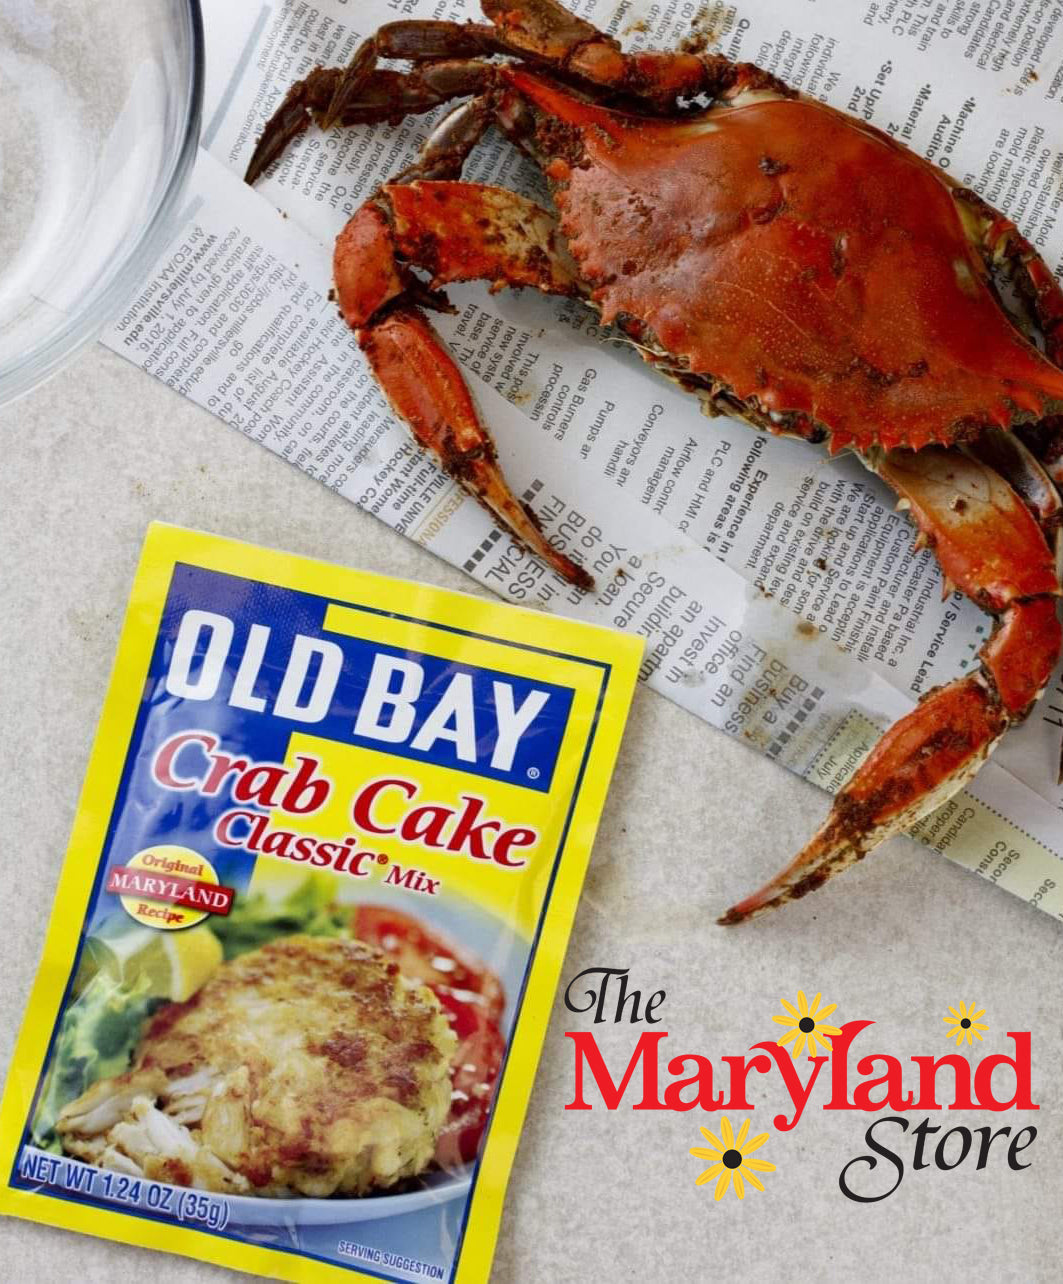 OLD BAY Crab Cakes Classic